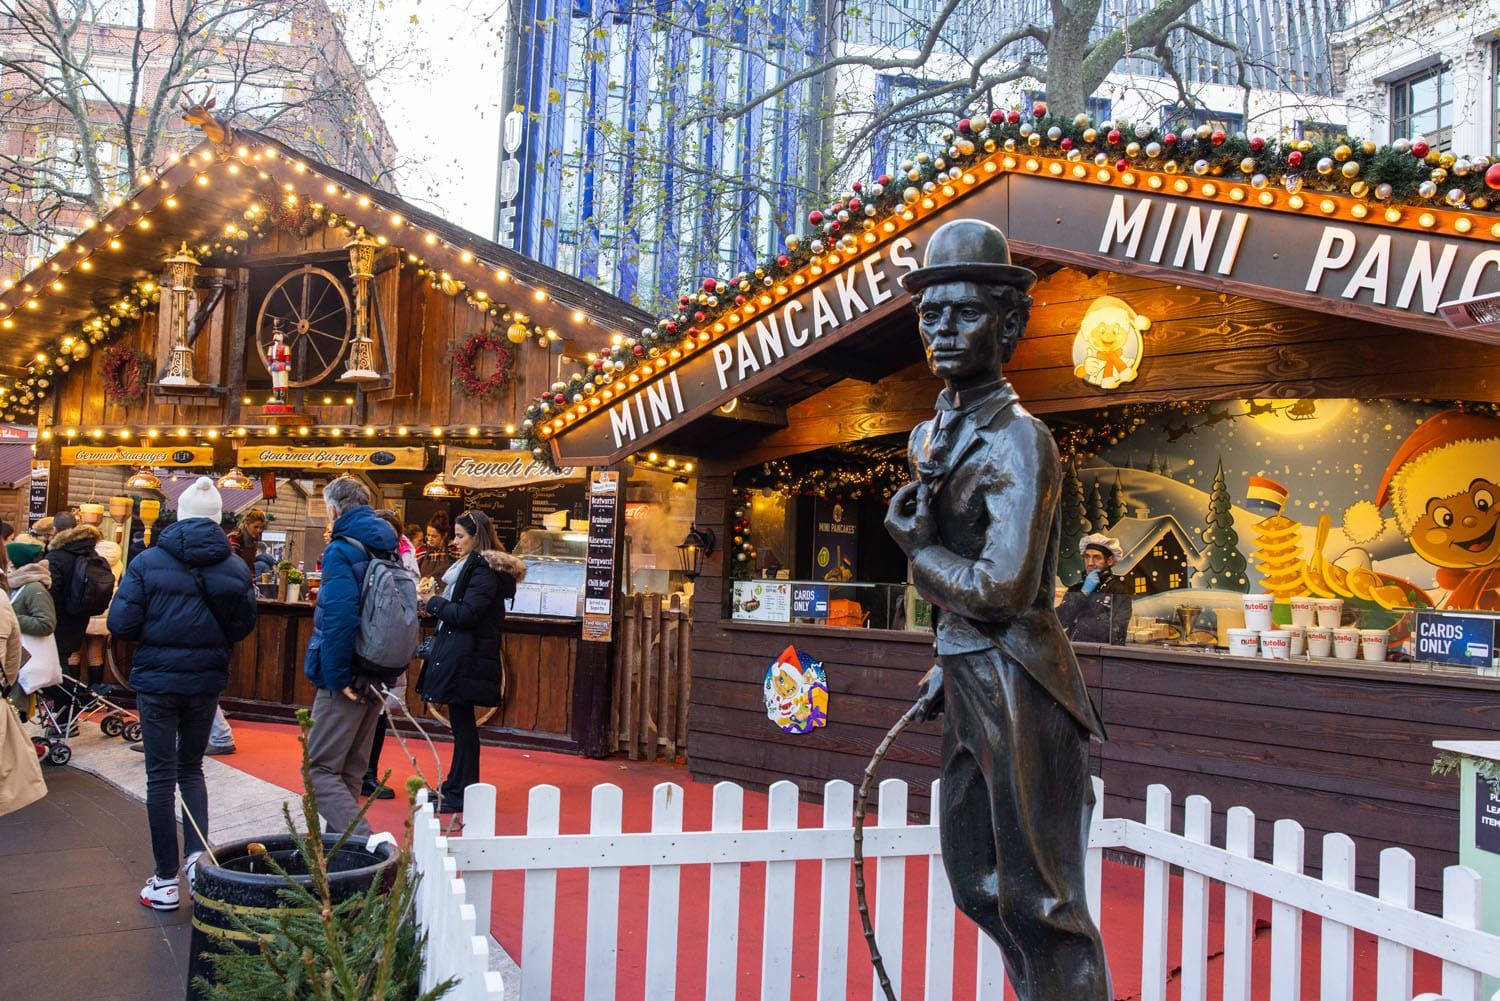 Leicester Square Christmas Market | Things to do in London at Christmas